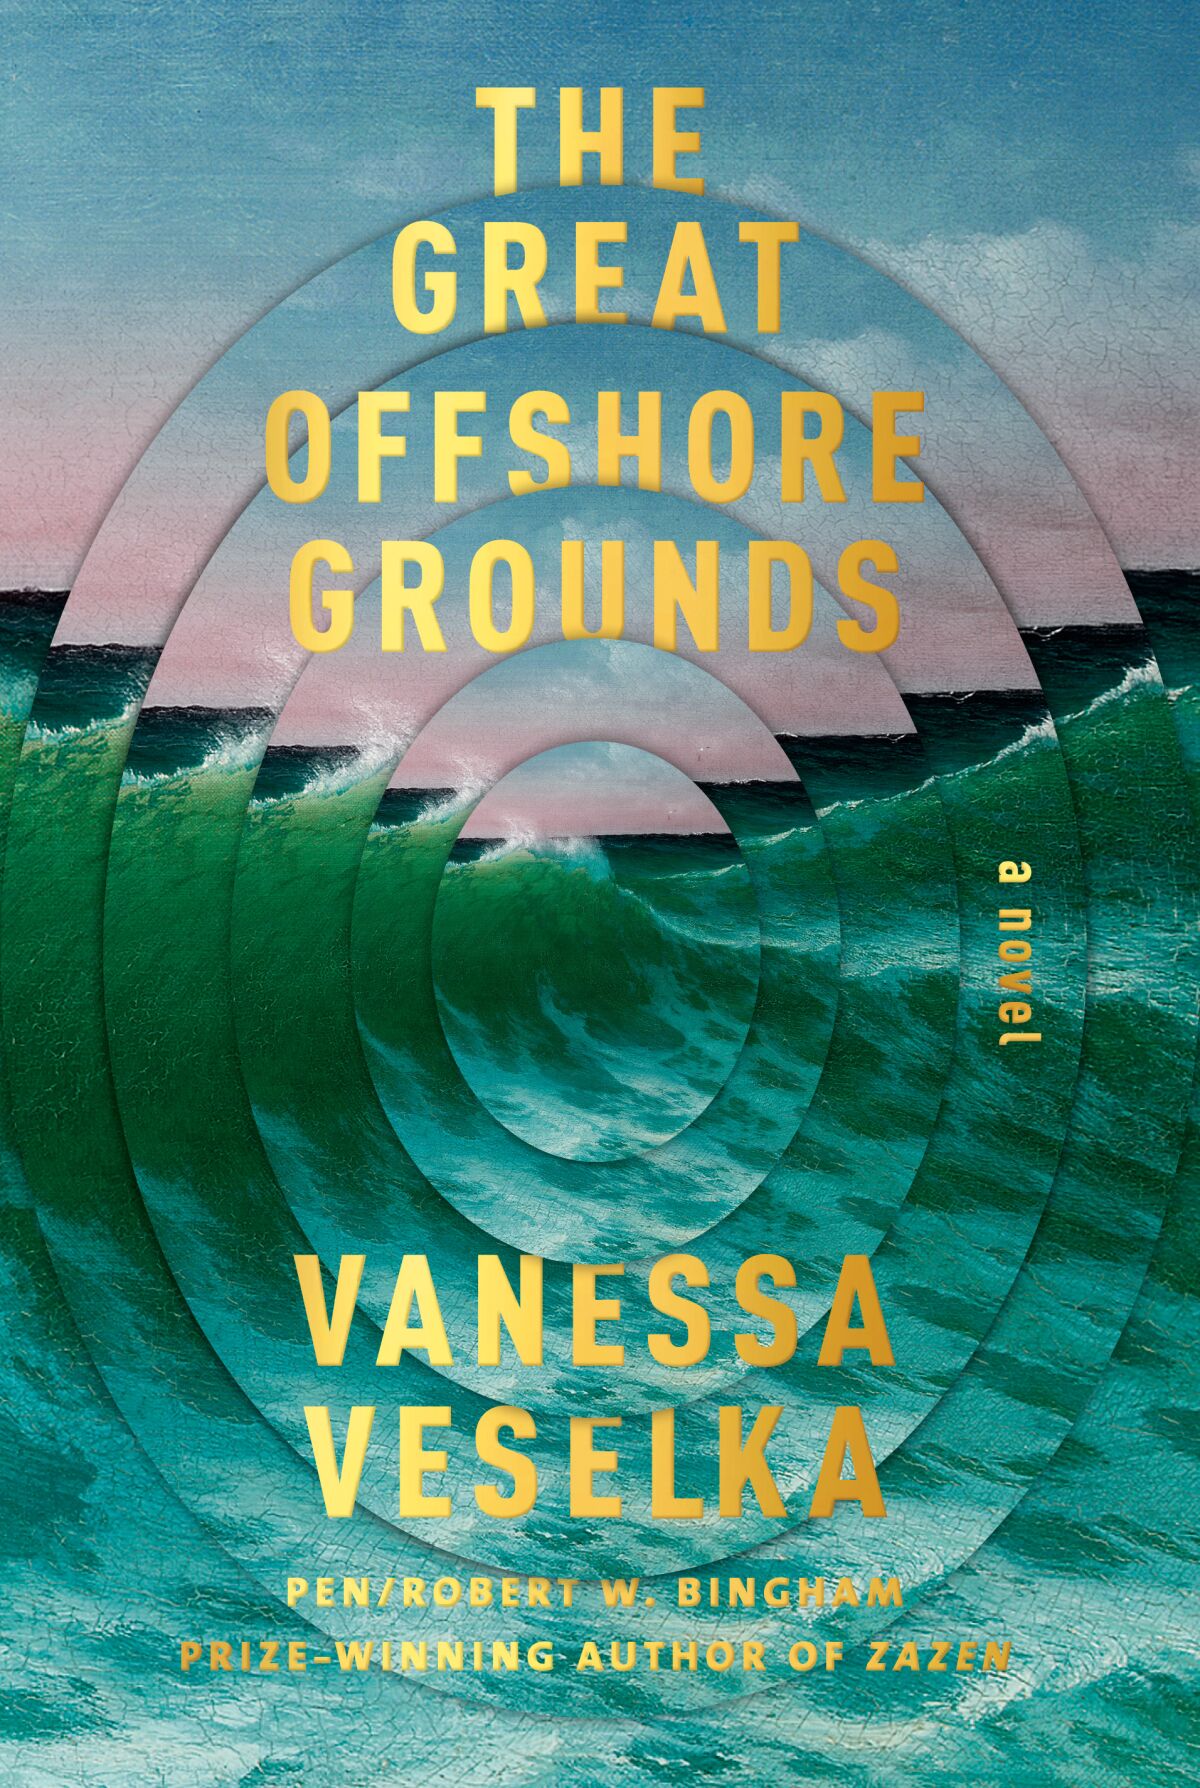 "The Great Offshore Grounds" by Vanessa Veselka.